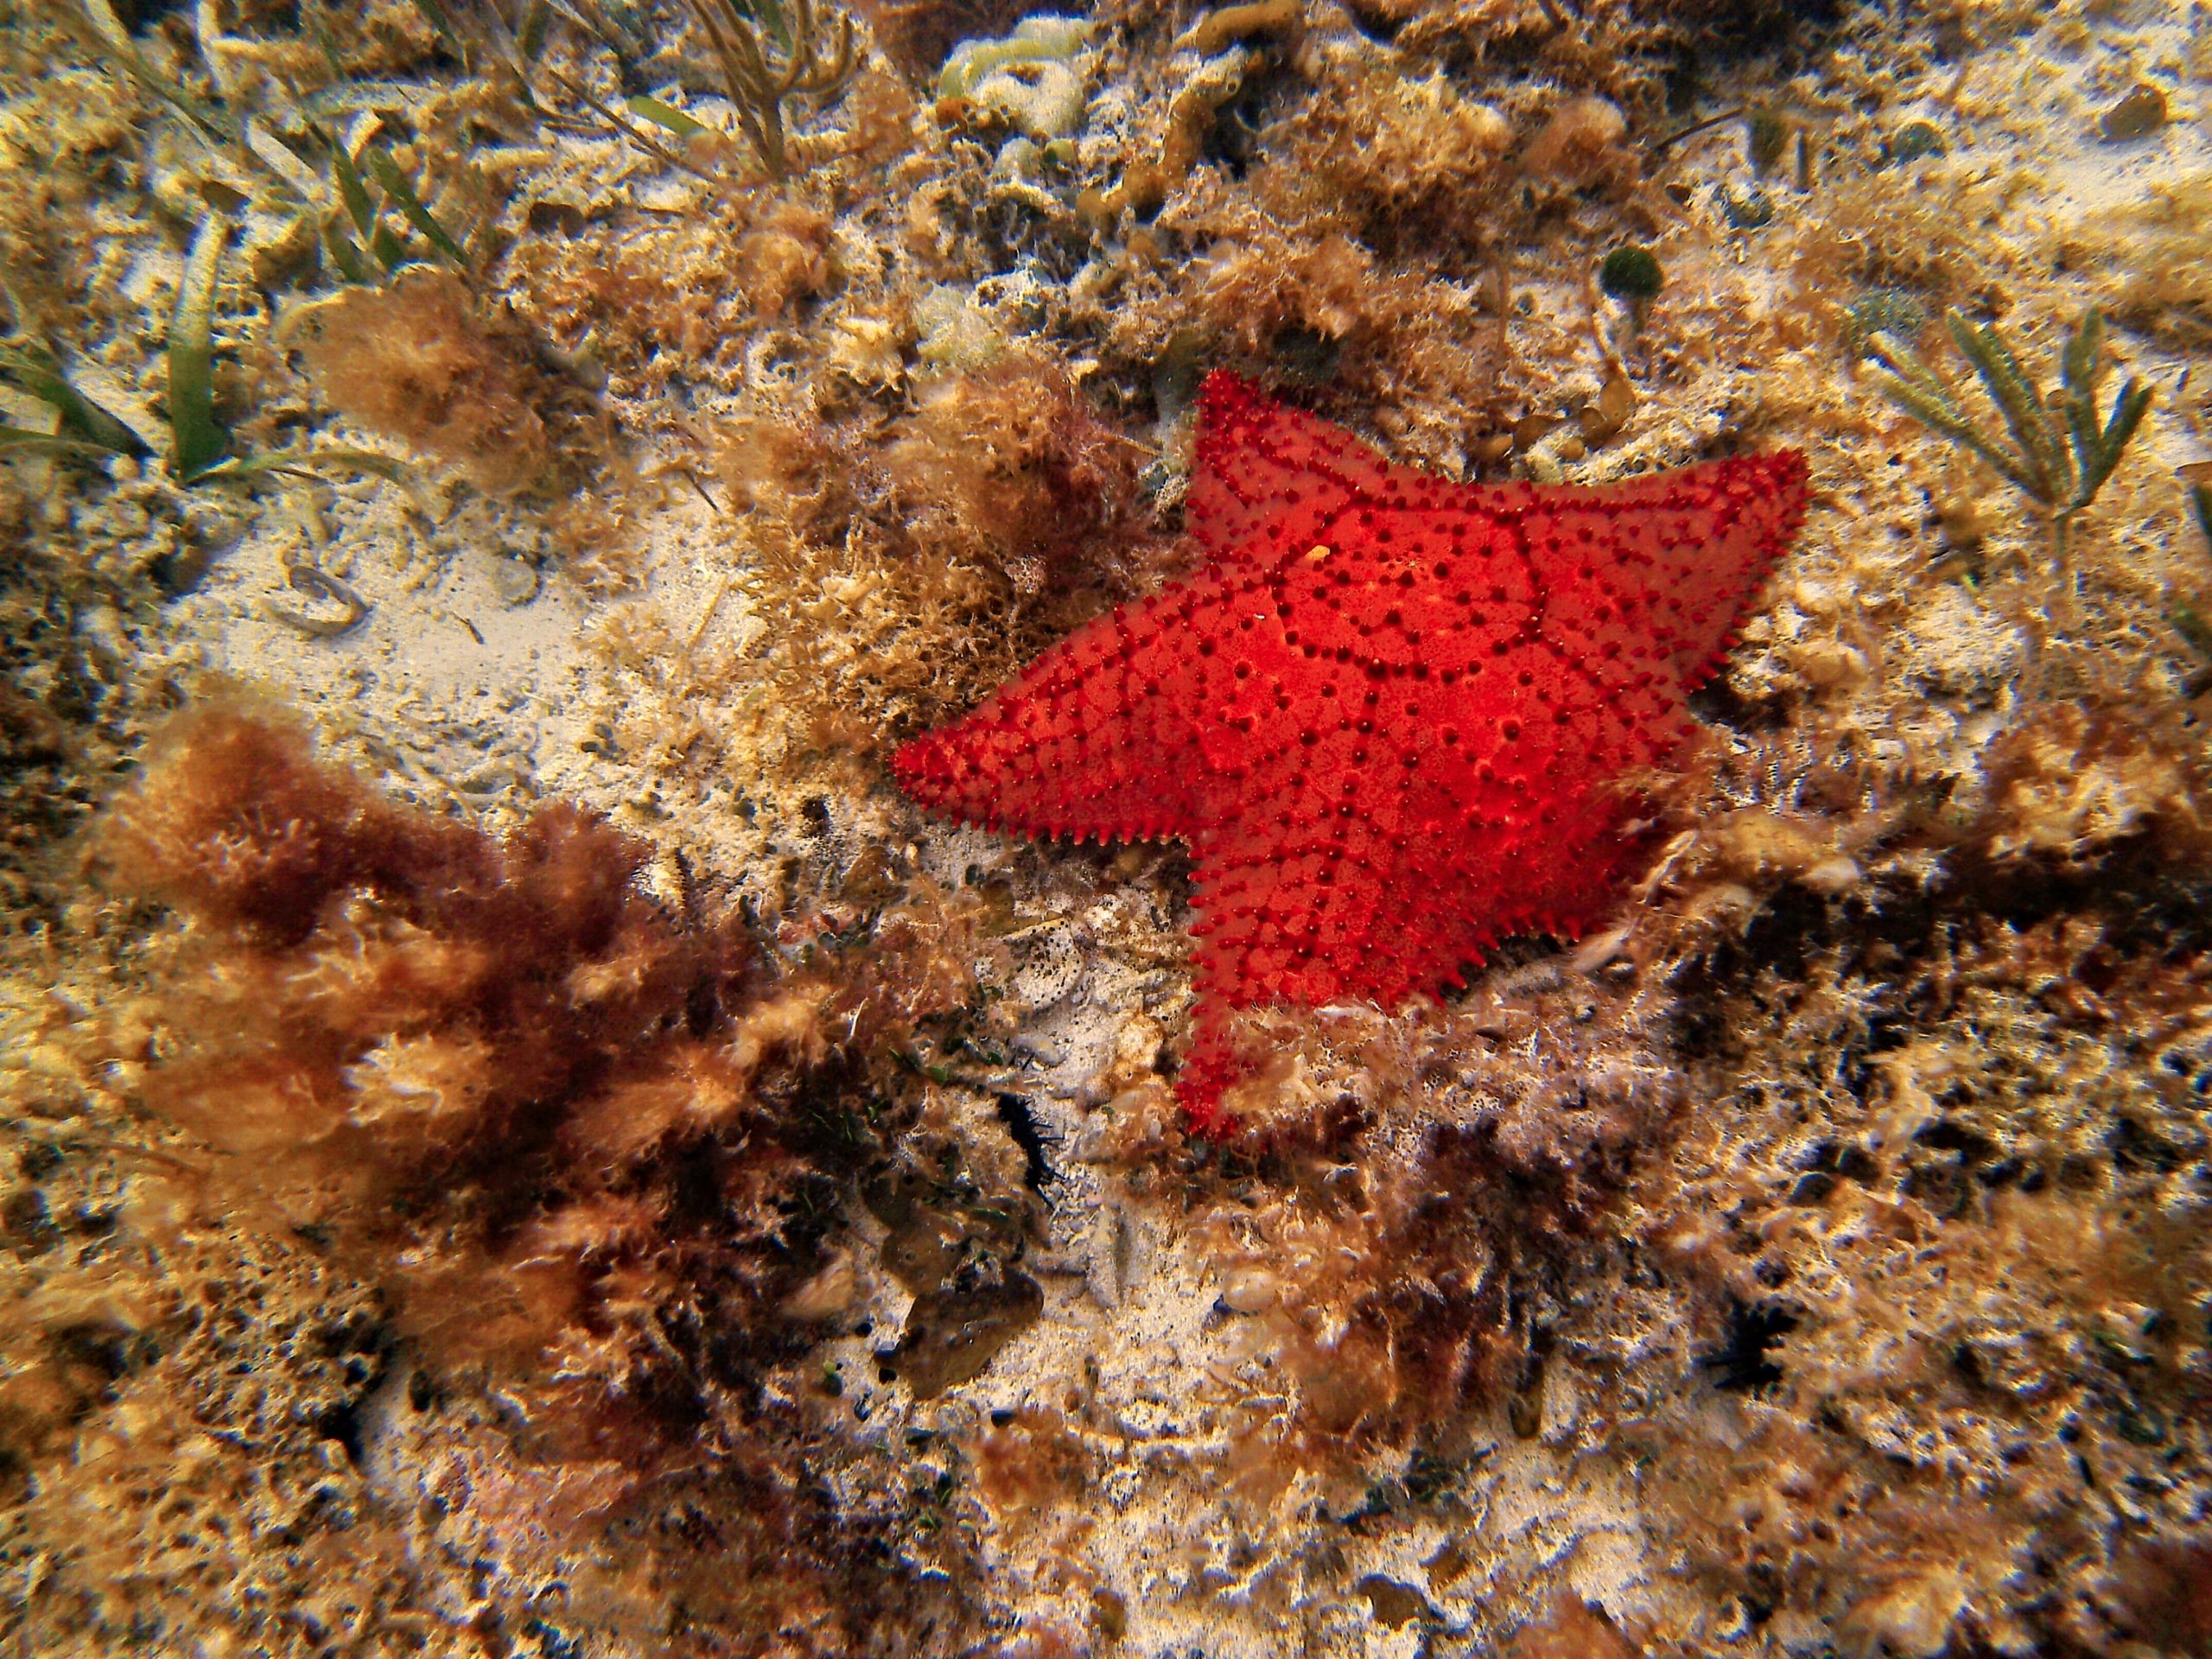 A red cushion sea star on a rock with algae and seagrass. PC: Phil_s 1stPix